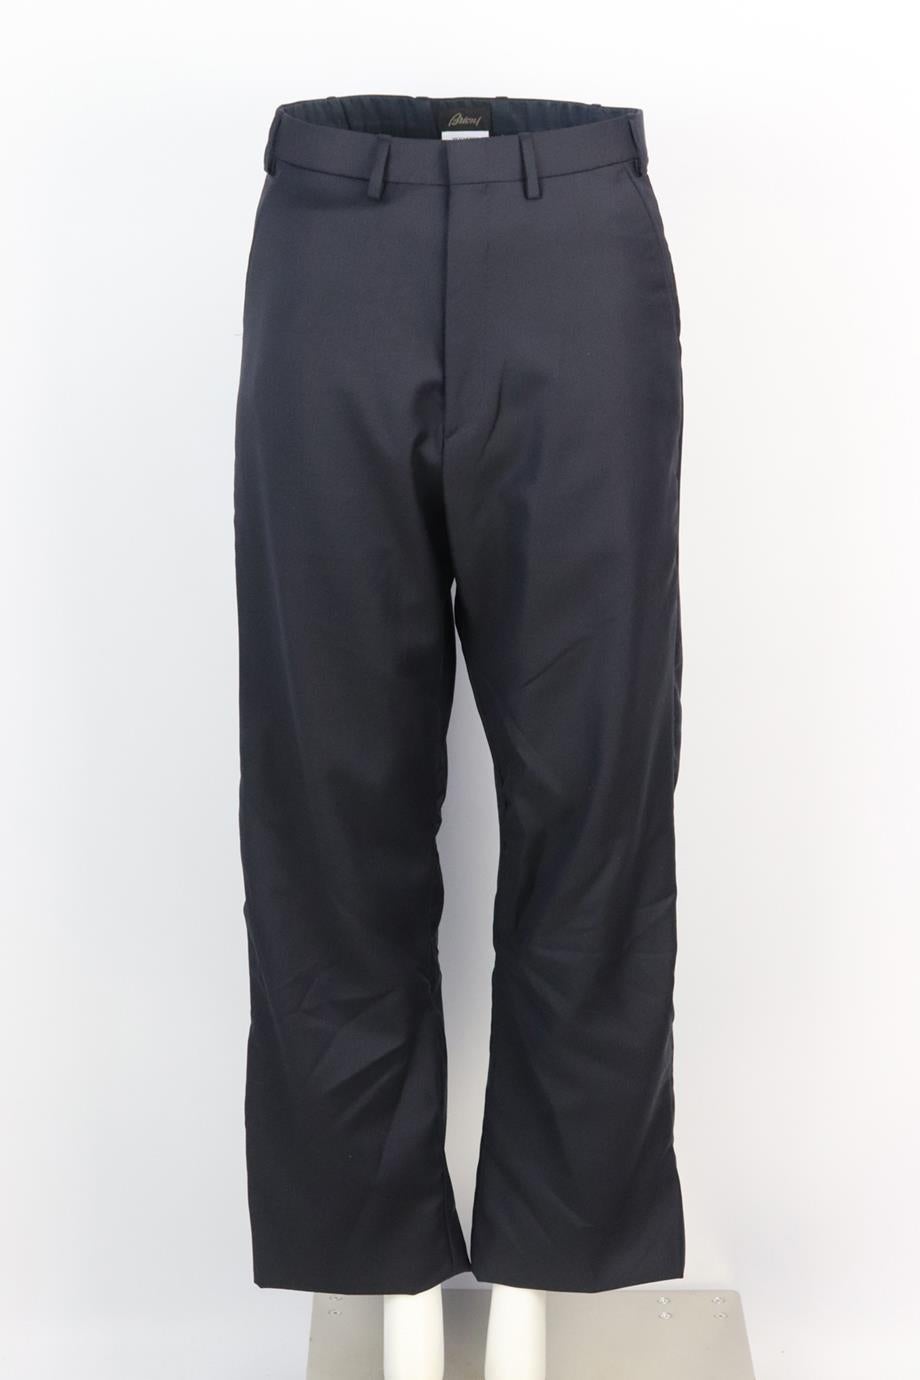 Vetements + Brioni wool straight leg pants. Navy. Hook, eye and zip fastening at front. 100% Wool; lining: 100% cotton. Size: XSmall (UK 6, US 2, FR 34, IT 38). Waist: 29.8 in. Hips: 40 in. Length: 40 in. Inseam: 27 in. Rise: 15 in. Very good